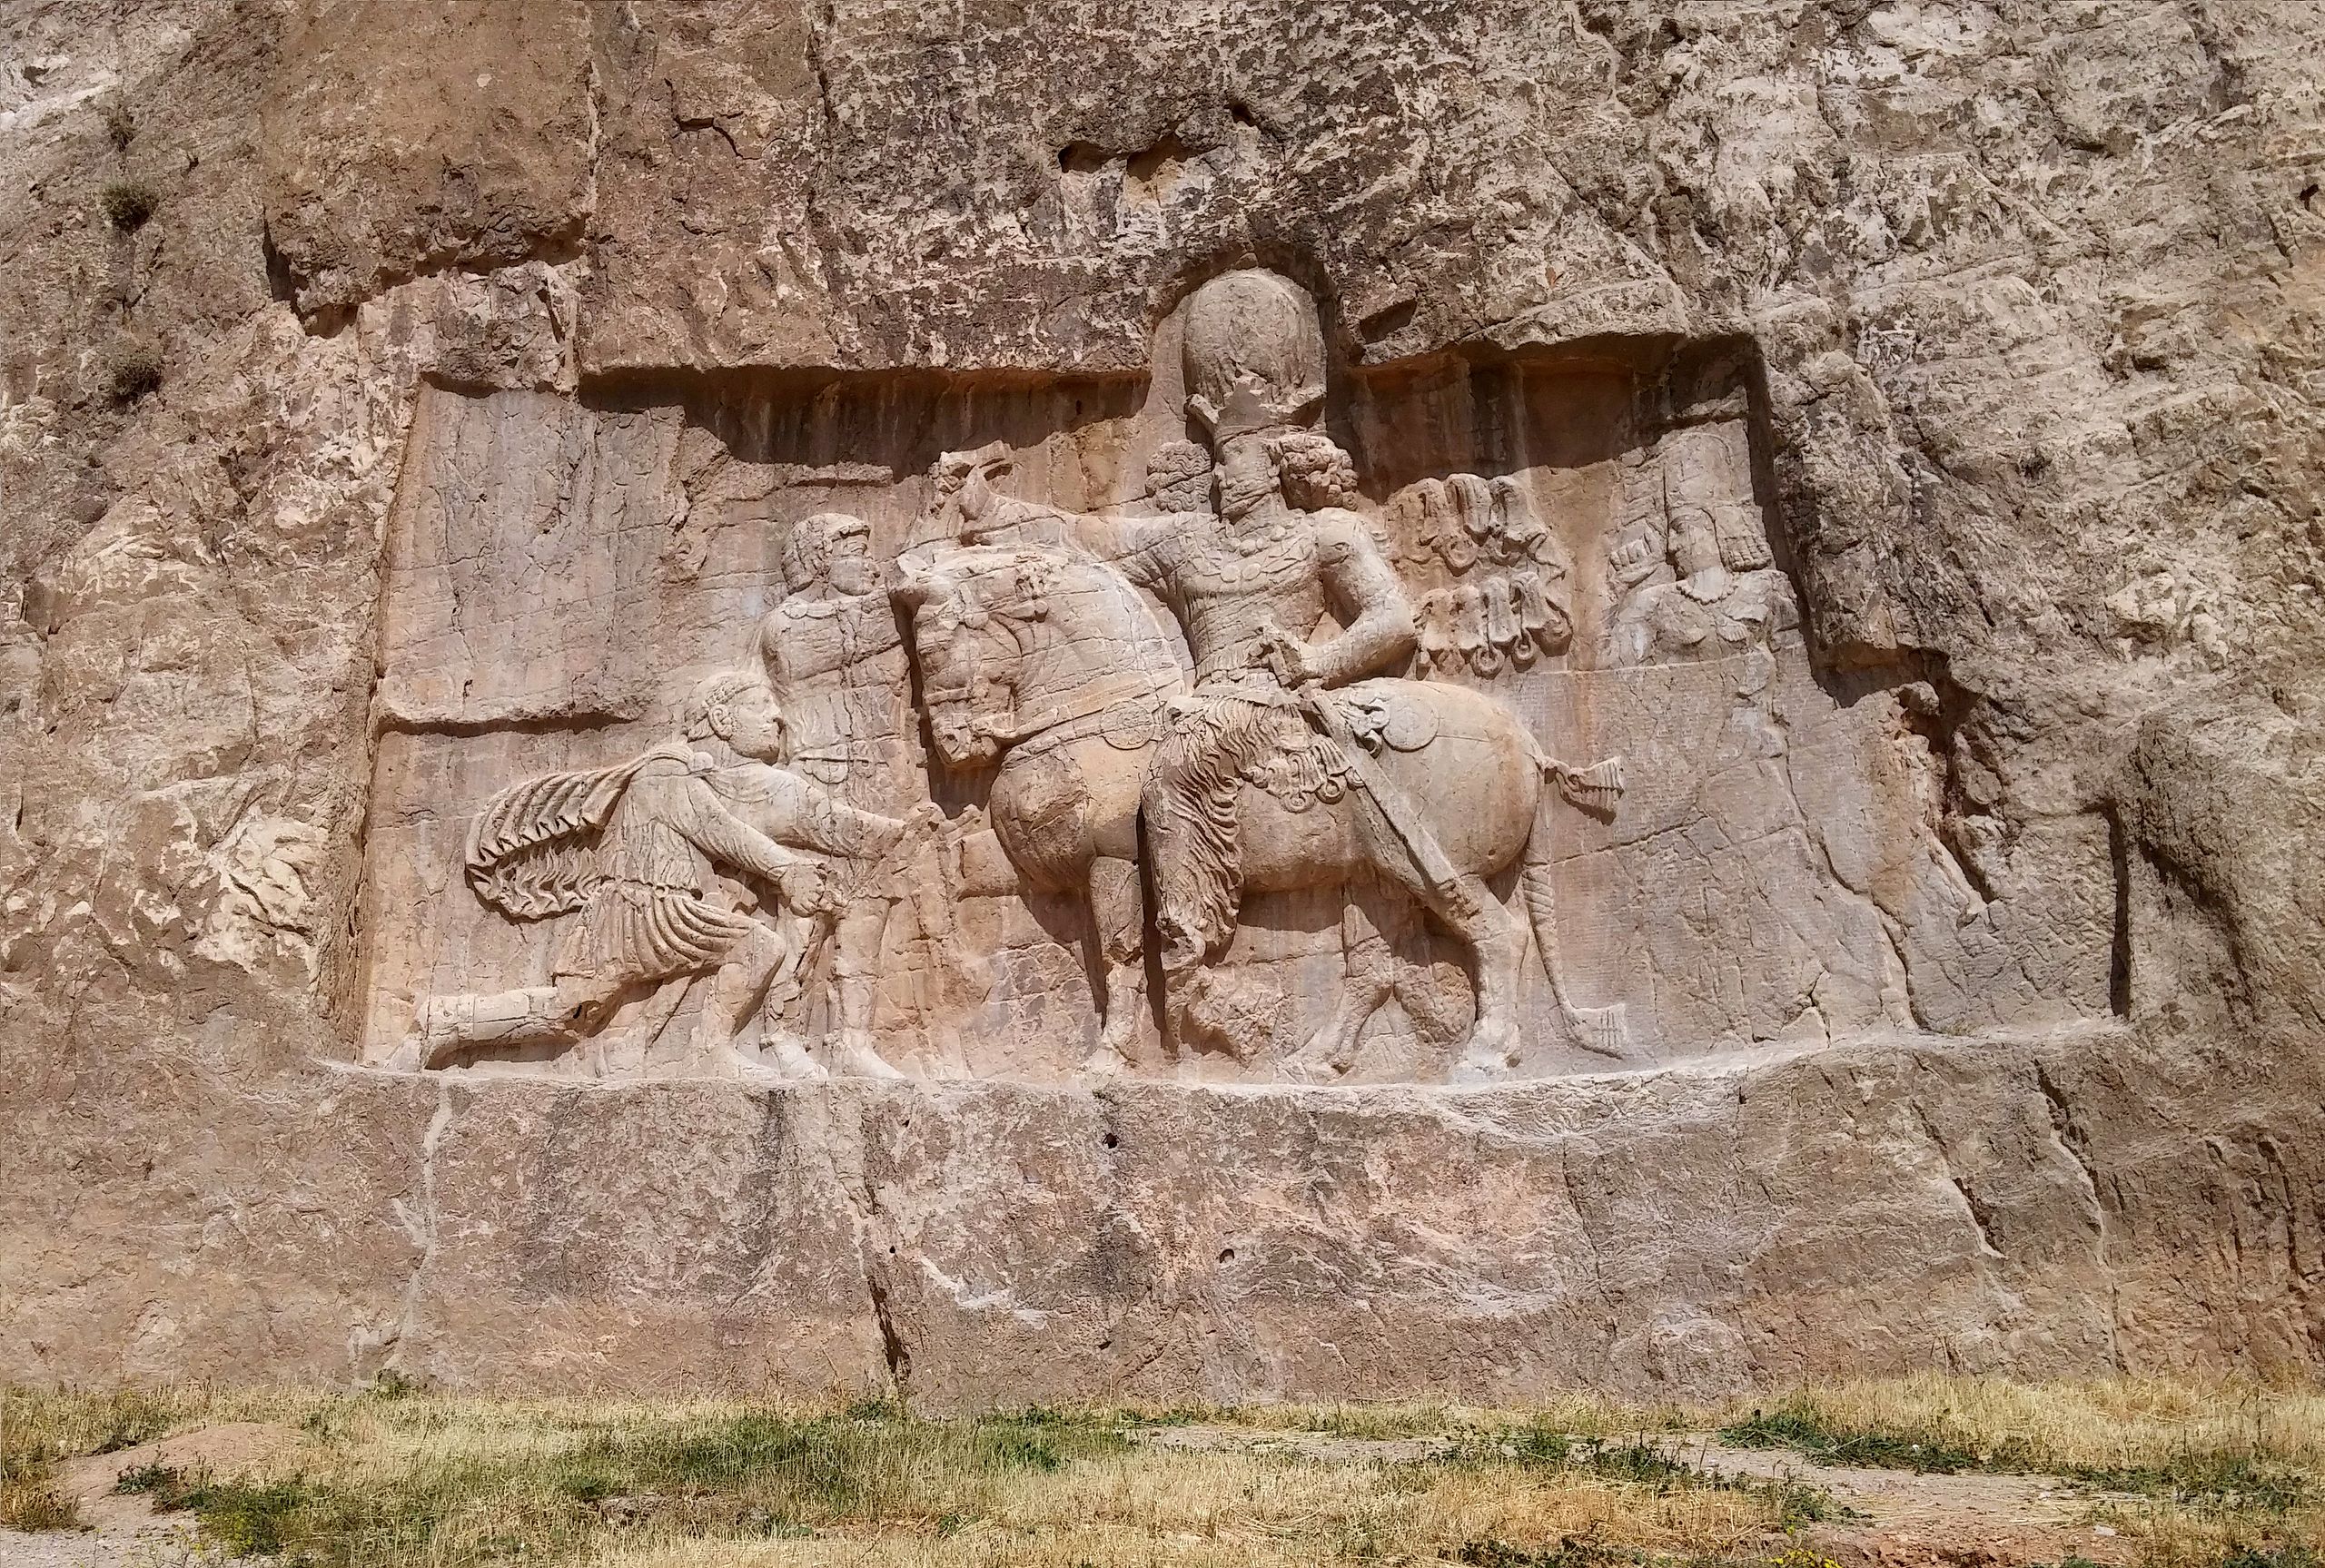 A relief depicting a man riding a horse on a rock.